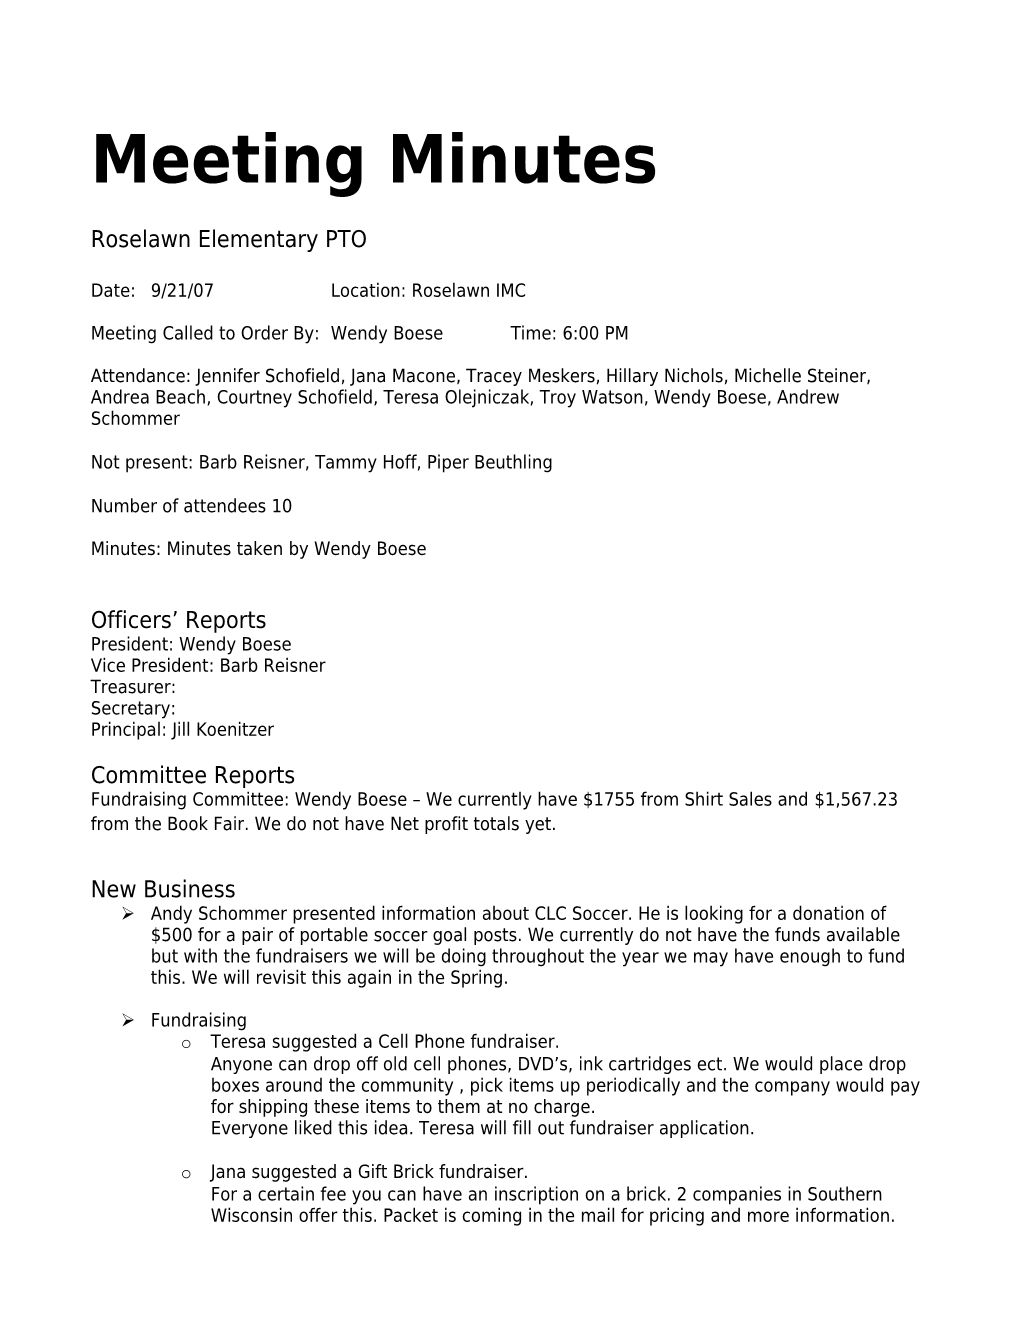 Meeting Minutes s7